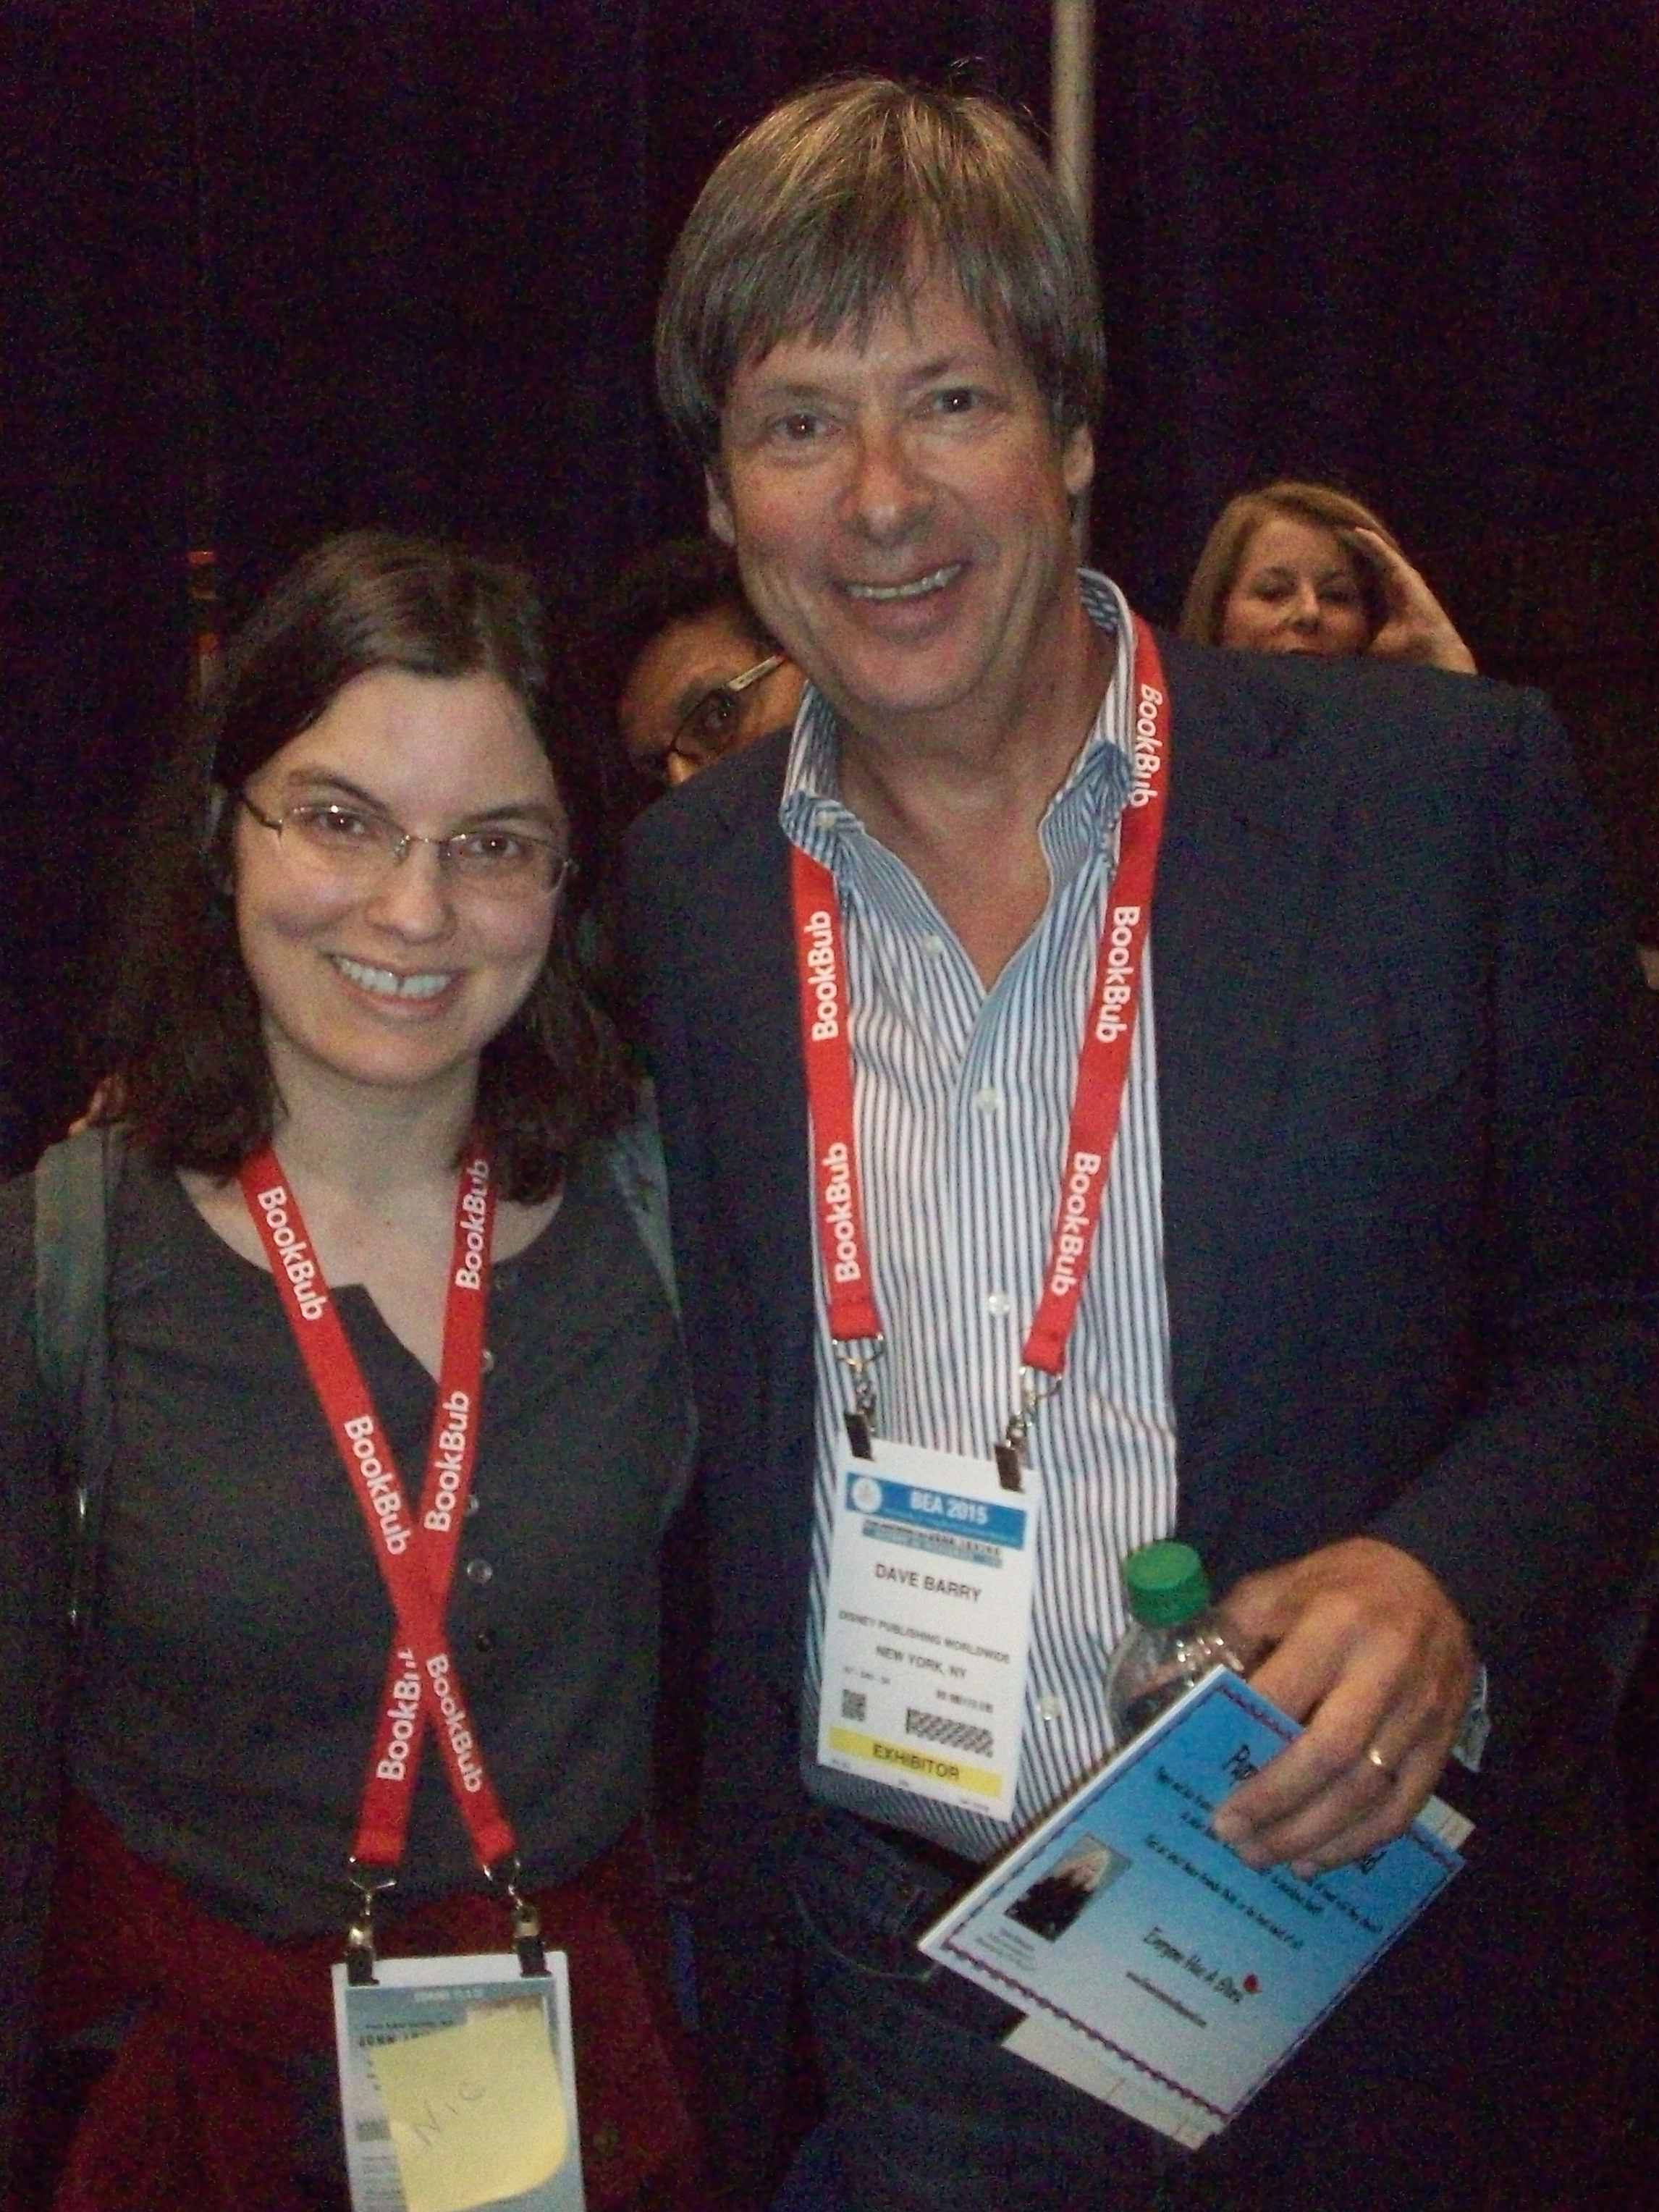 Anica Lewis with author and humorist Dave Barry